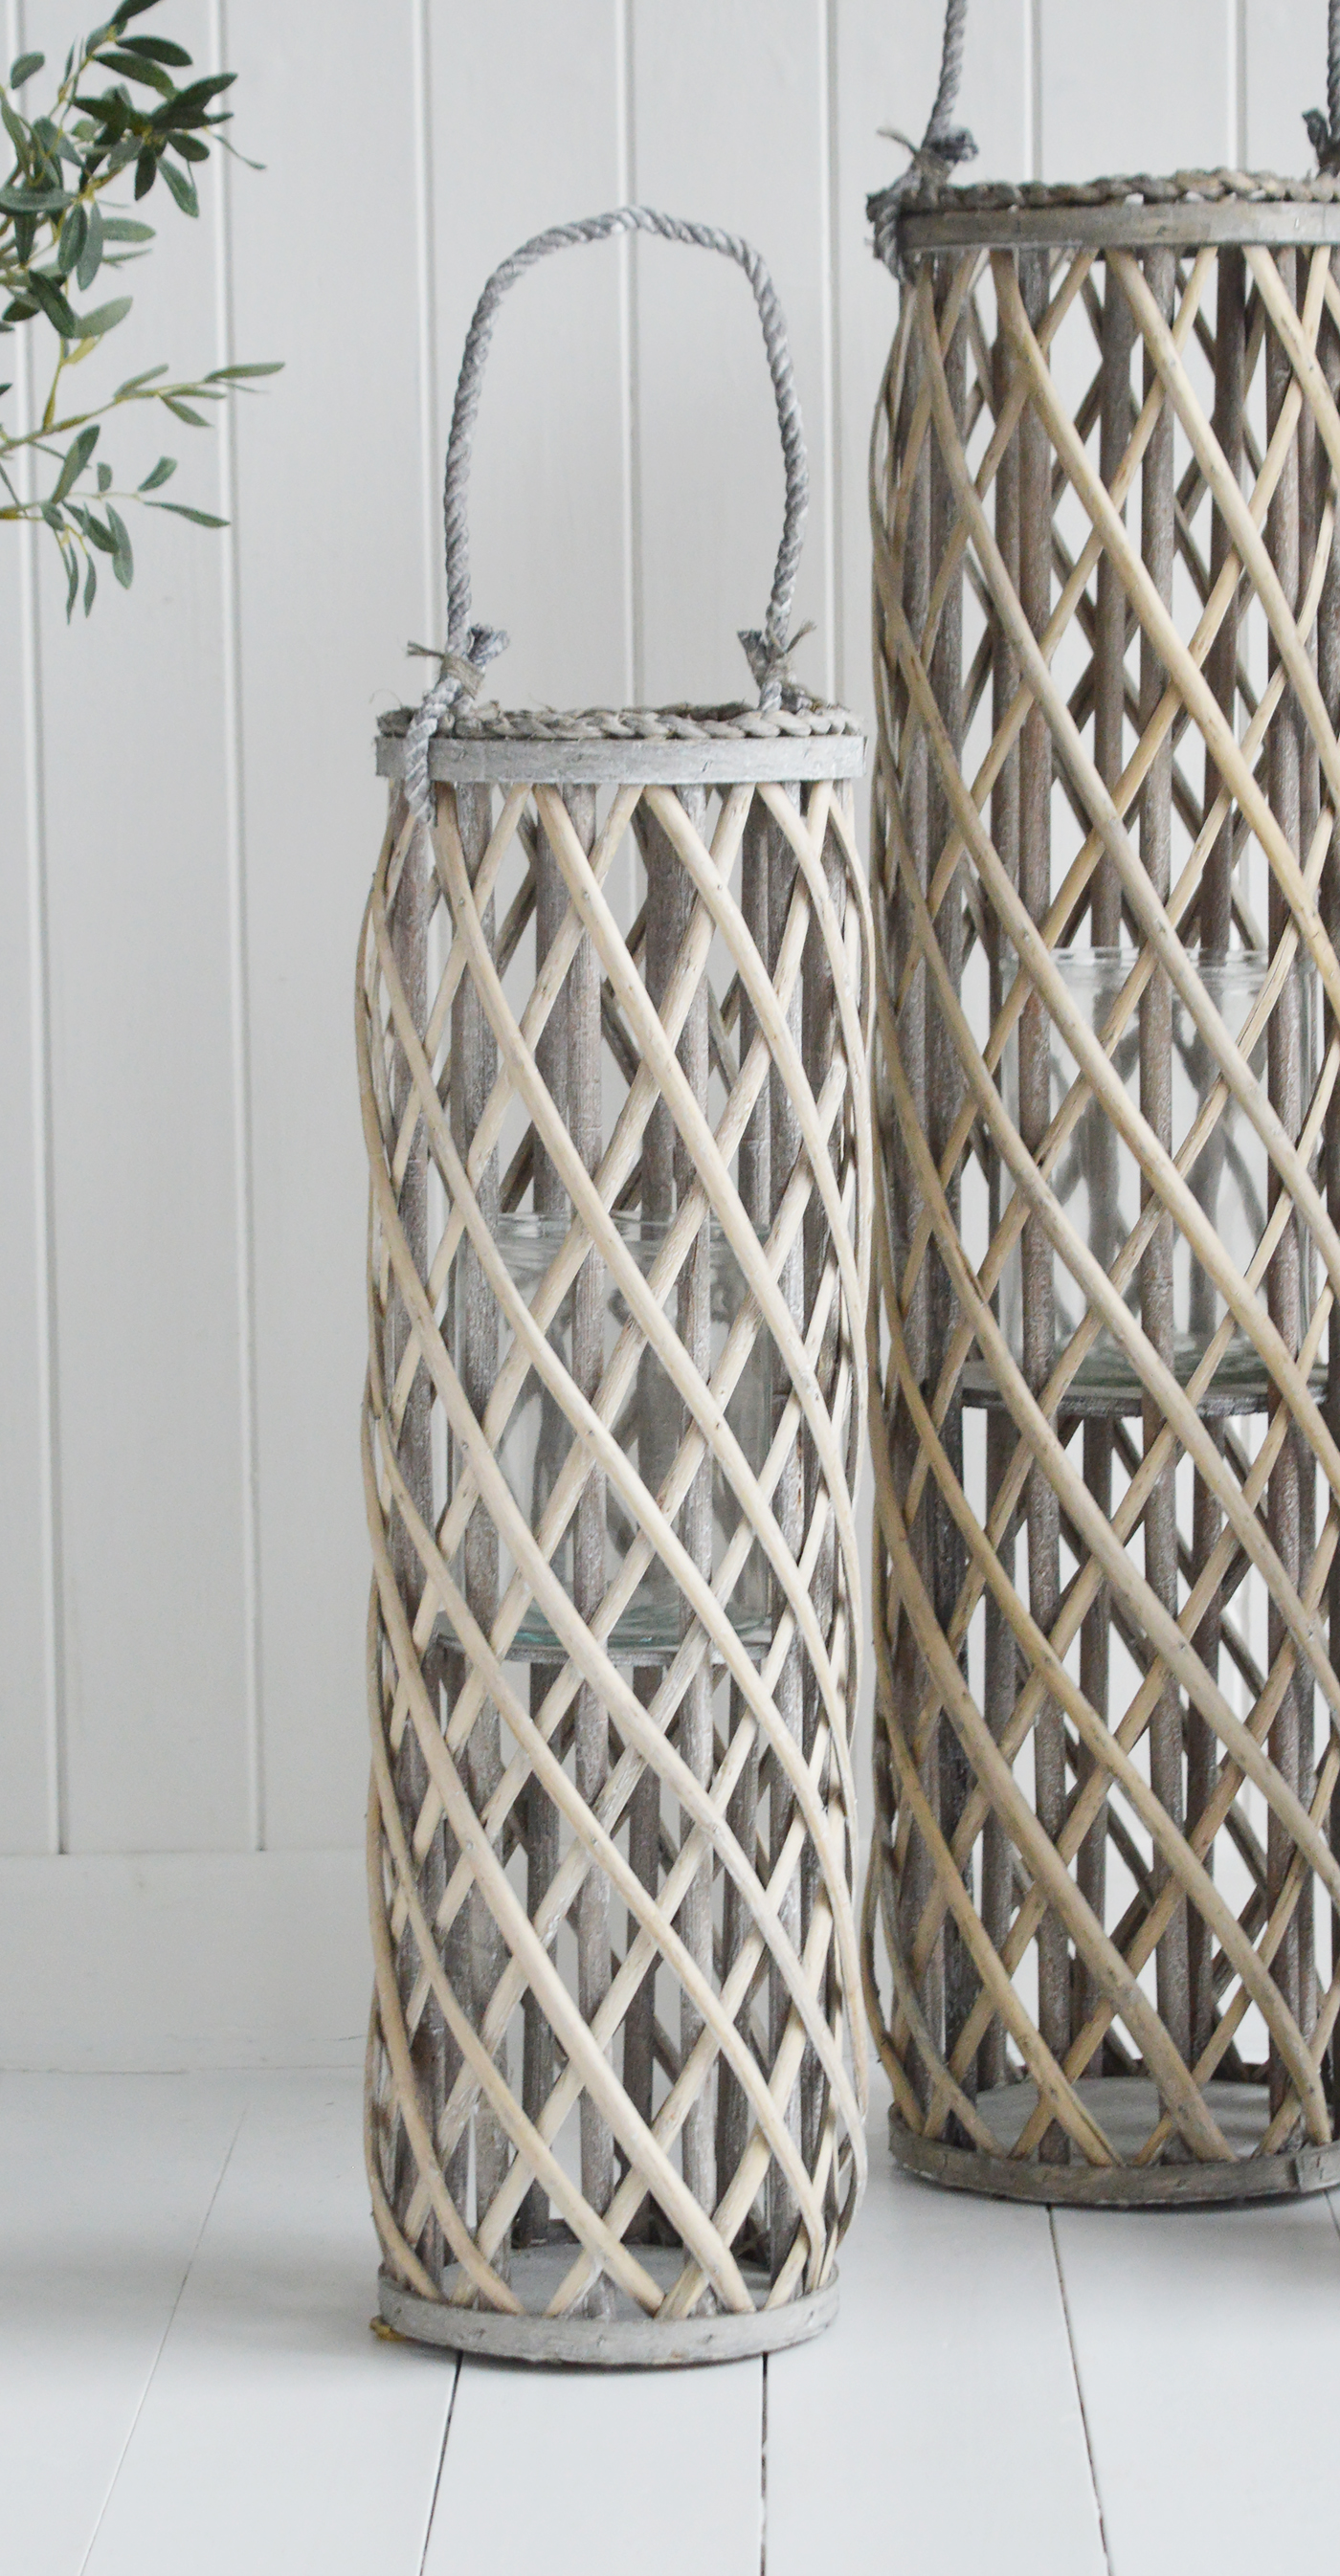 Cornwall Grey Willow Lanterns - New England Coastal & Country Furniture and Home Decor for beauriful homes. Hallway, Living Room Bedroom and Bathroom furniture